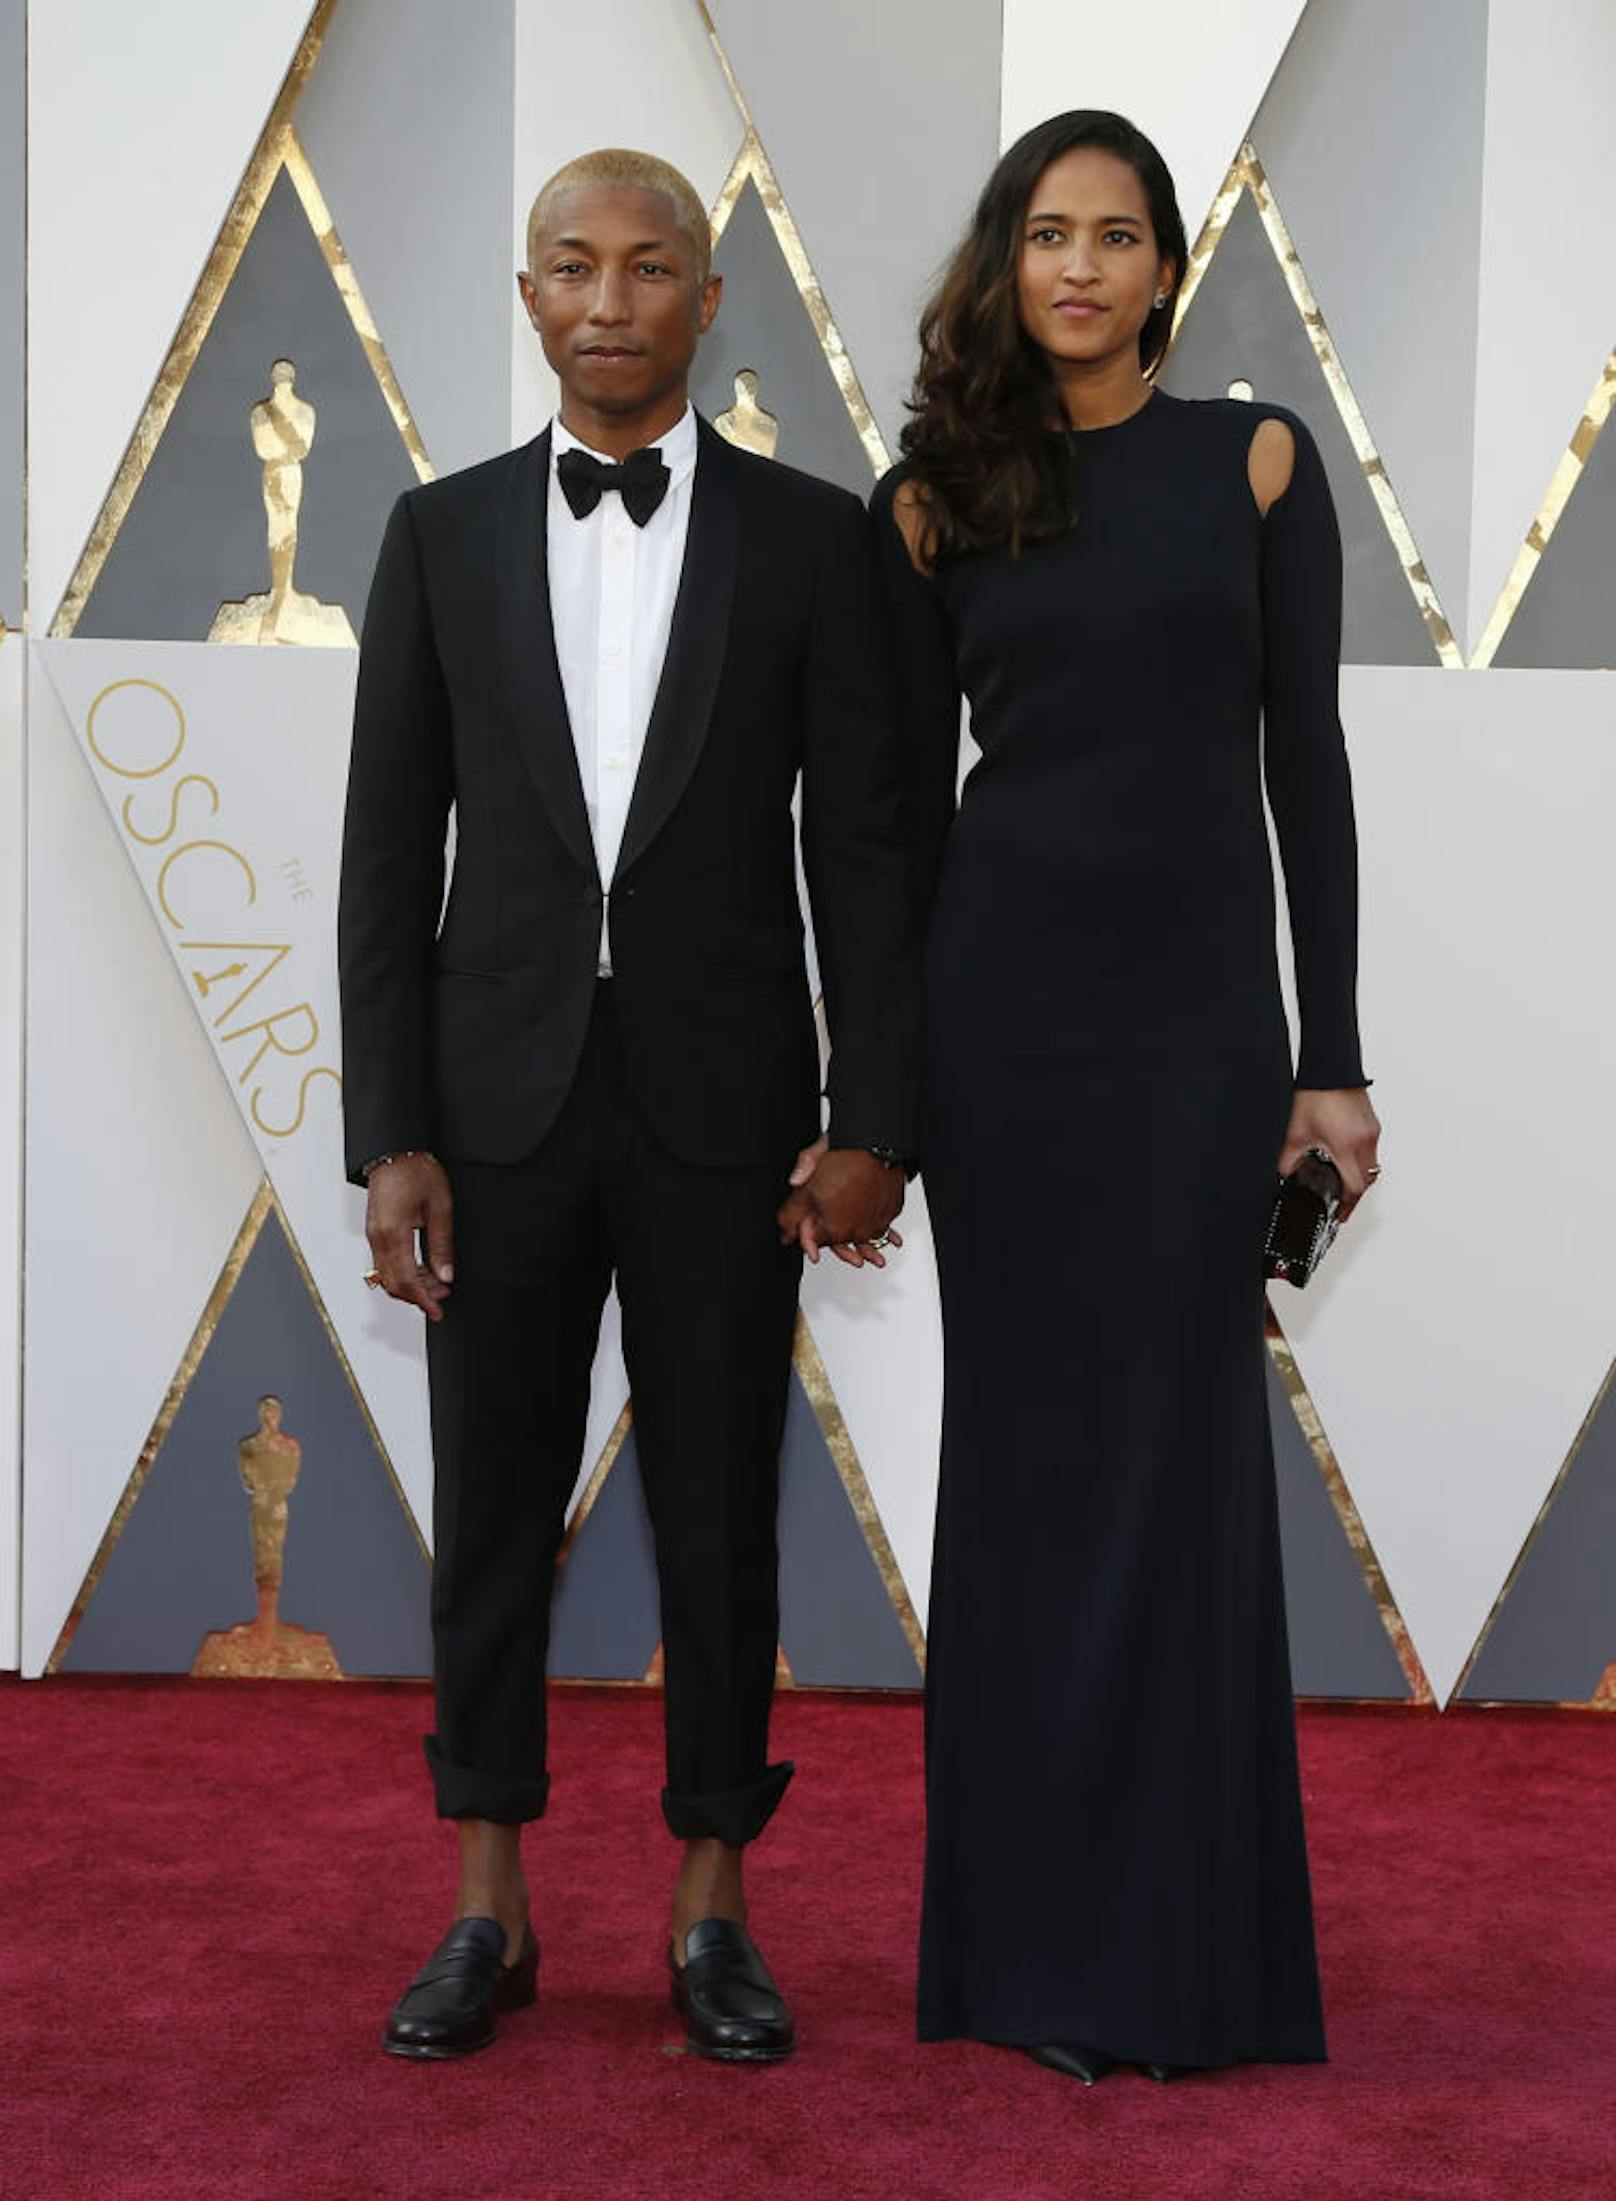 Singer Pharrell Williams and wife Helen Lasichanh arrive at the 88th Academy Awards in Hollywood, California February 28, 2016.  REUTERS/Lucy Nicholson - RTS8G3Z